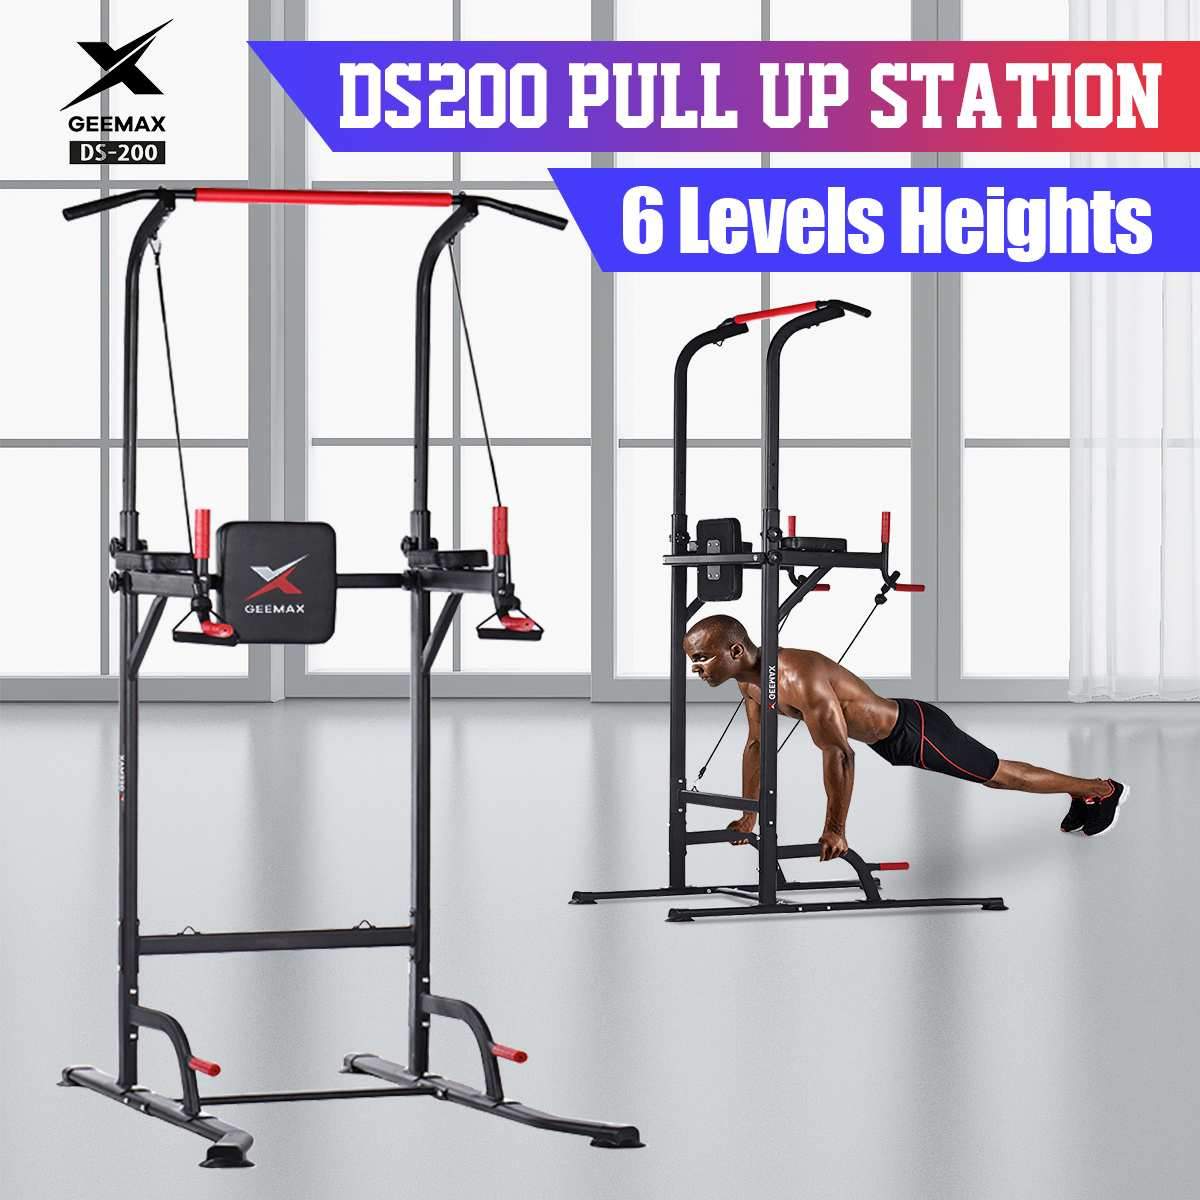 XGEEMAX Pull Up Bar Station | Power Tower | Dip Station | Home Gym Tower Adjustable Height | Strength Training Gym Equipment for Whole Body Workout - Sterl Silver